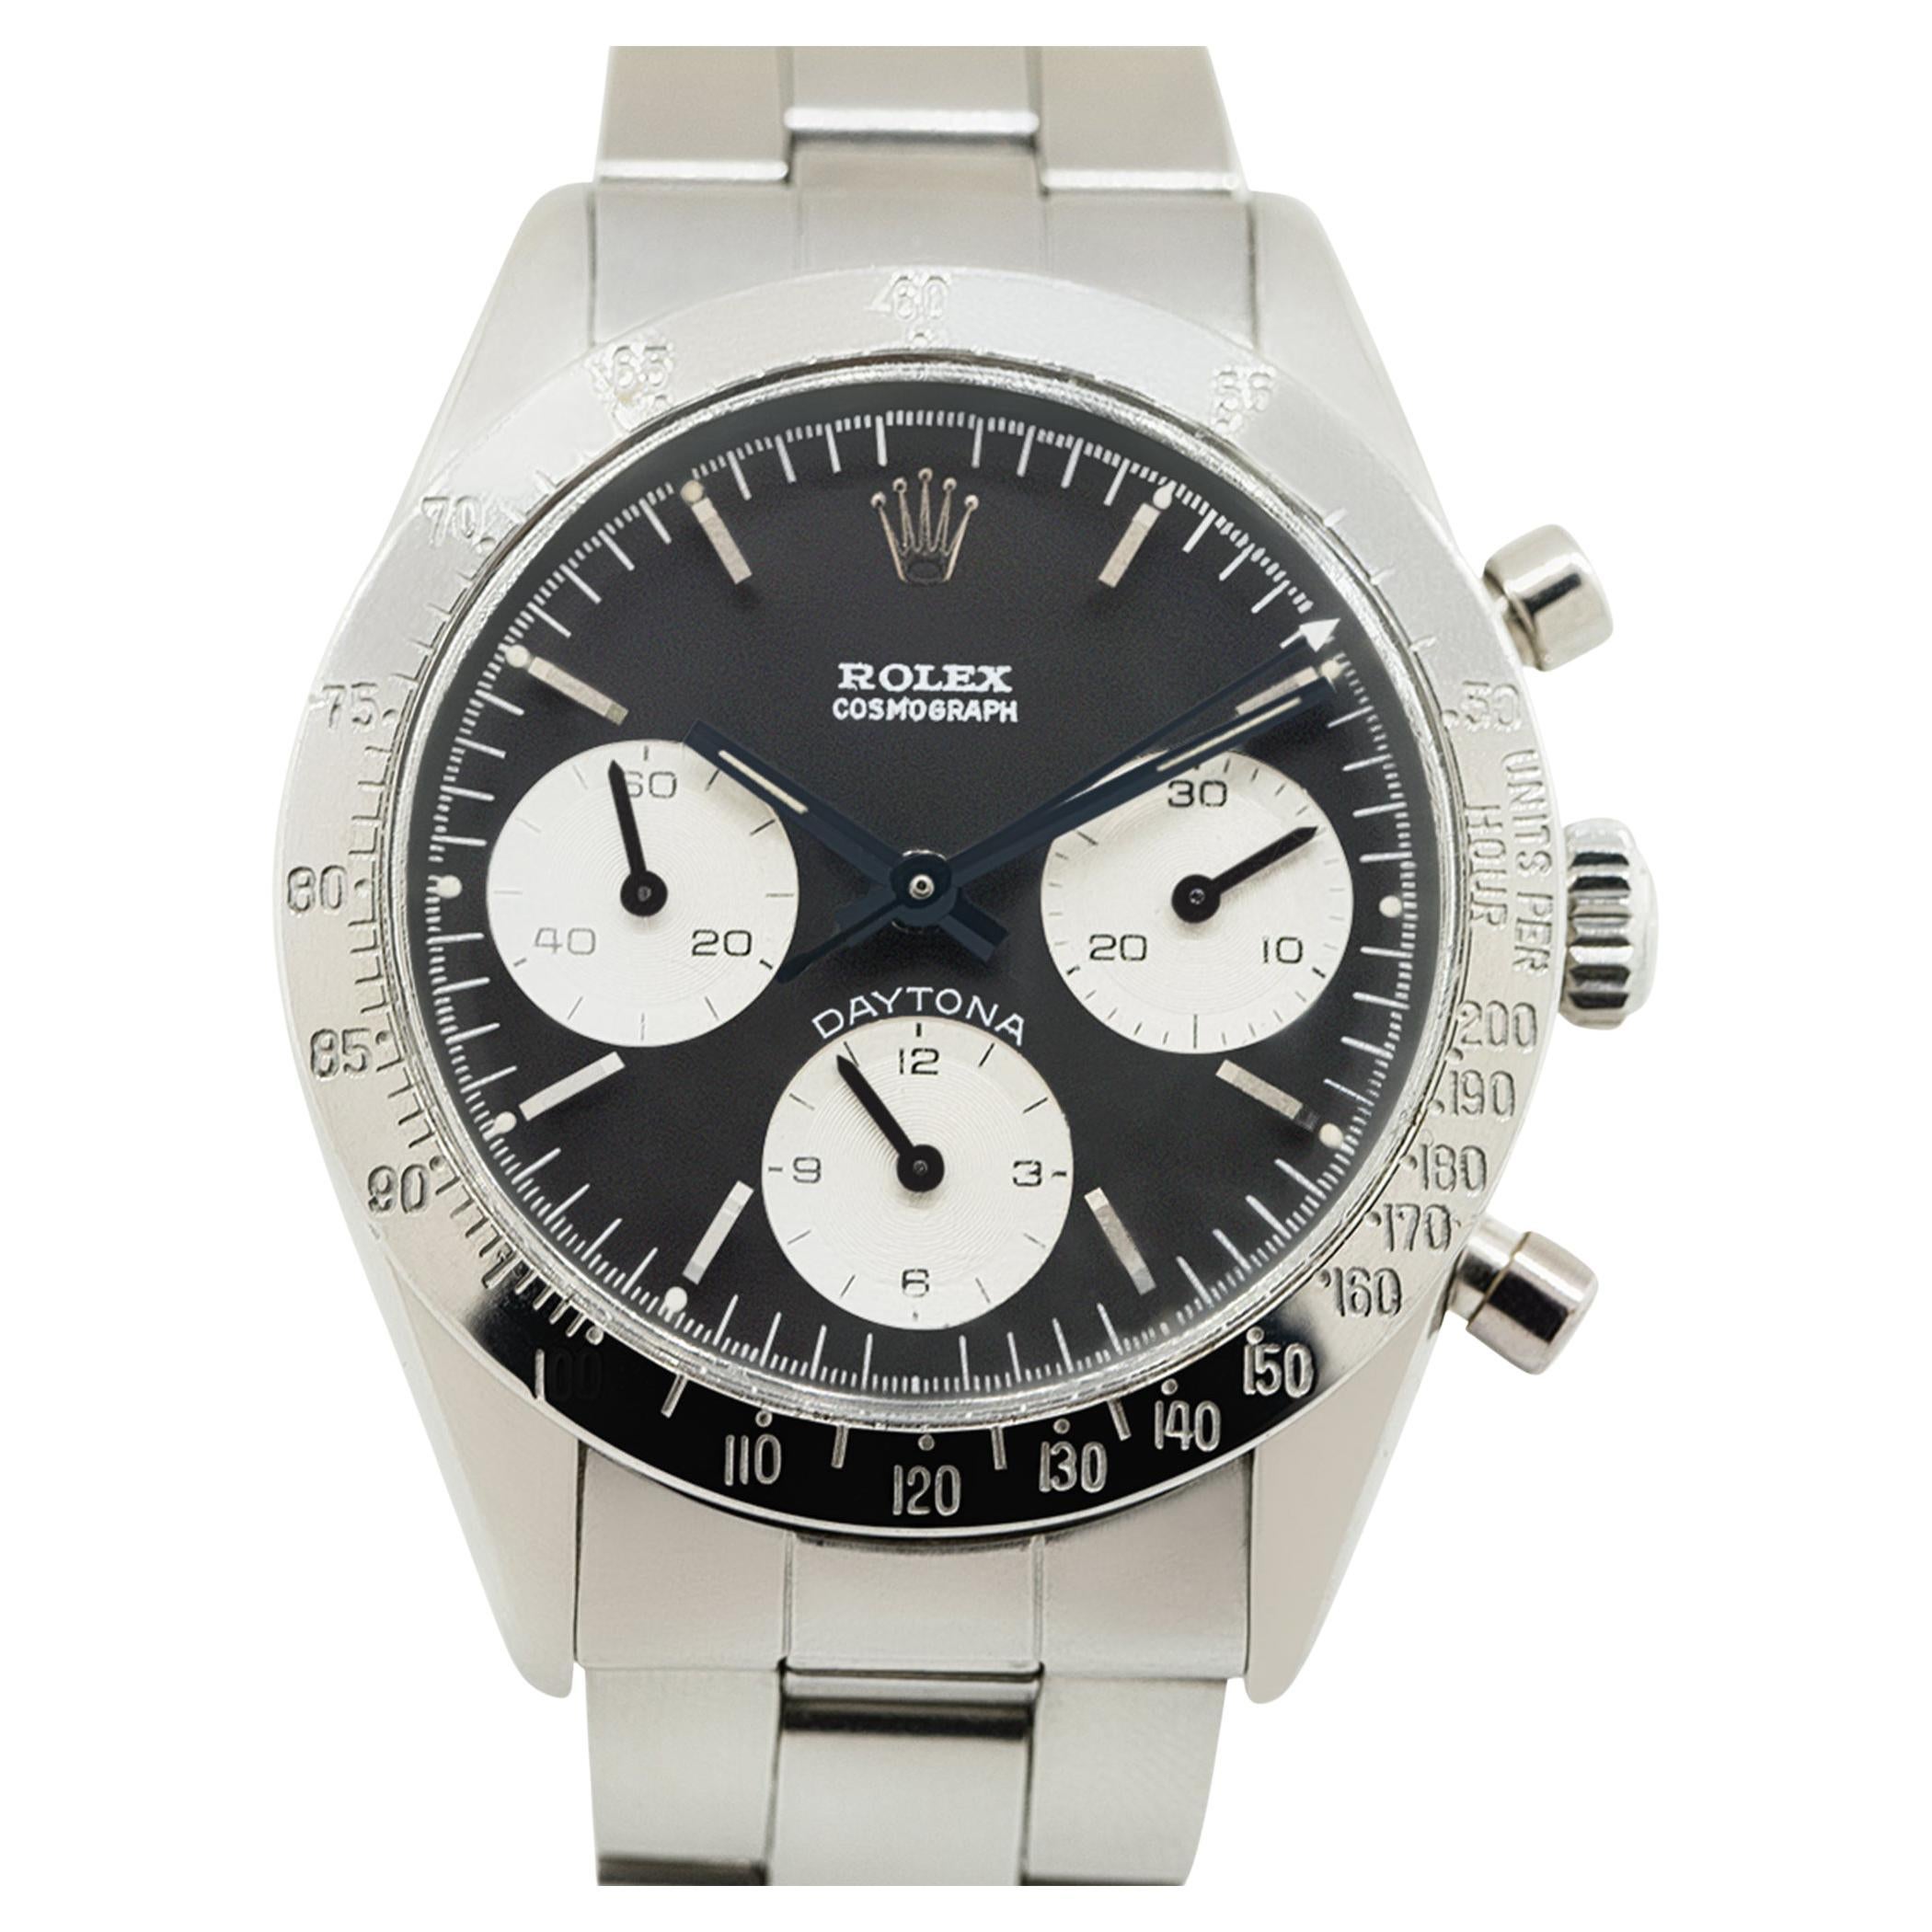 Rolex 6239 Daytona Stainless Steel Watch in Stock For Sale